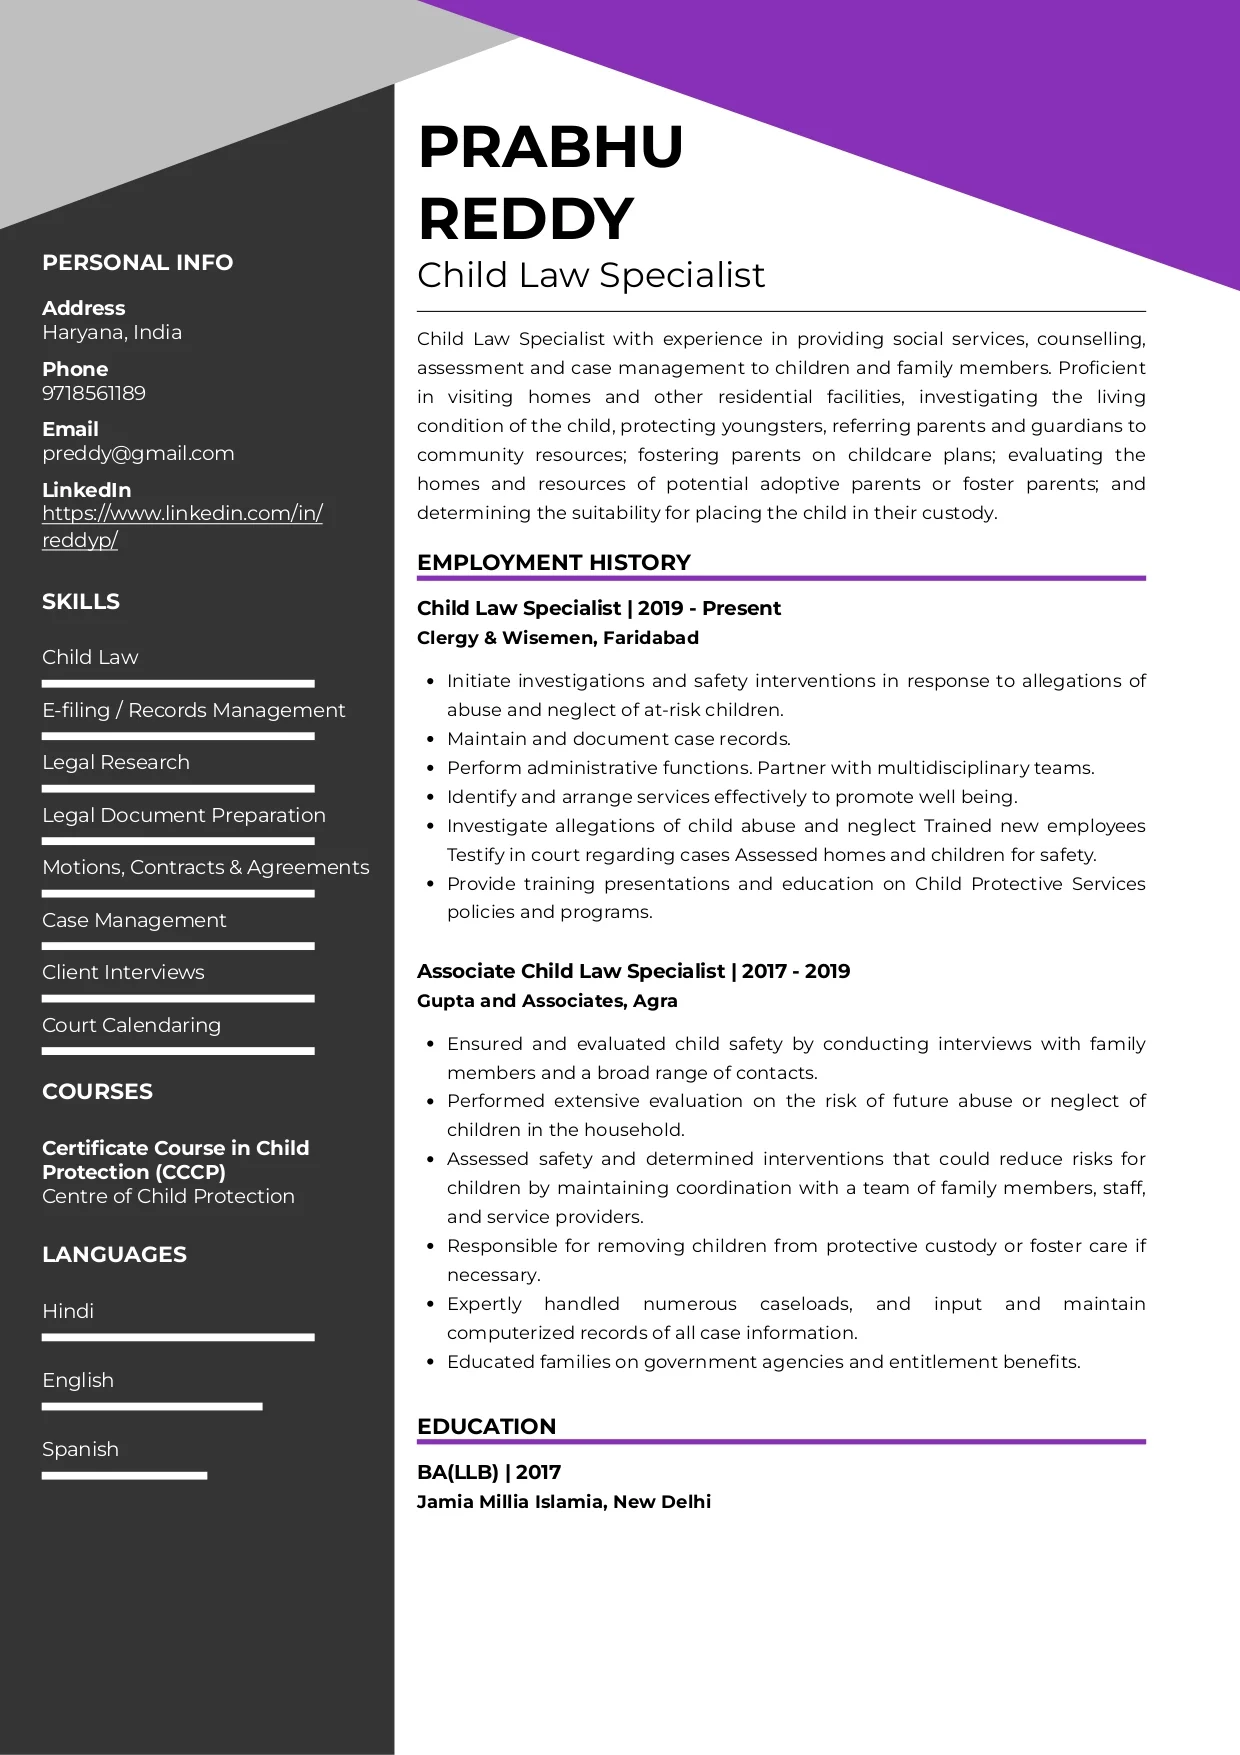 Sample Resume of Child Law Specialist | Free Resume Templates & Samples on Resumod.co